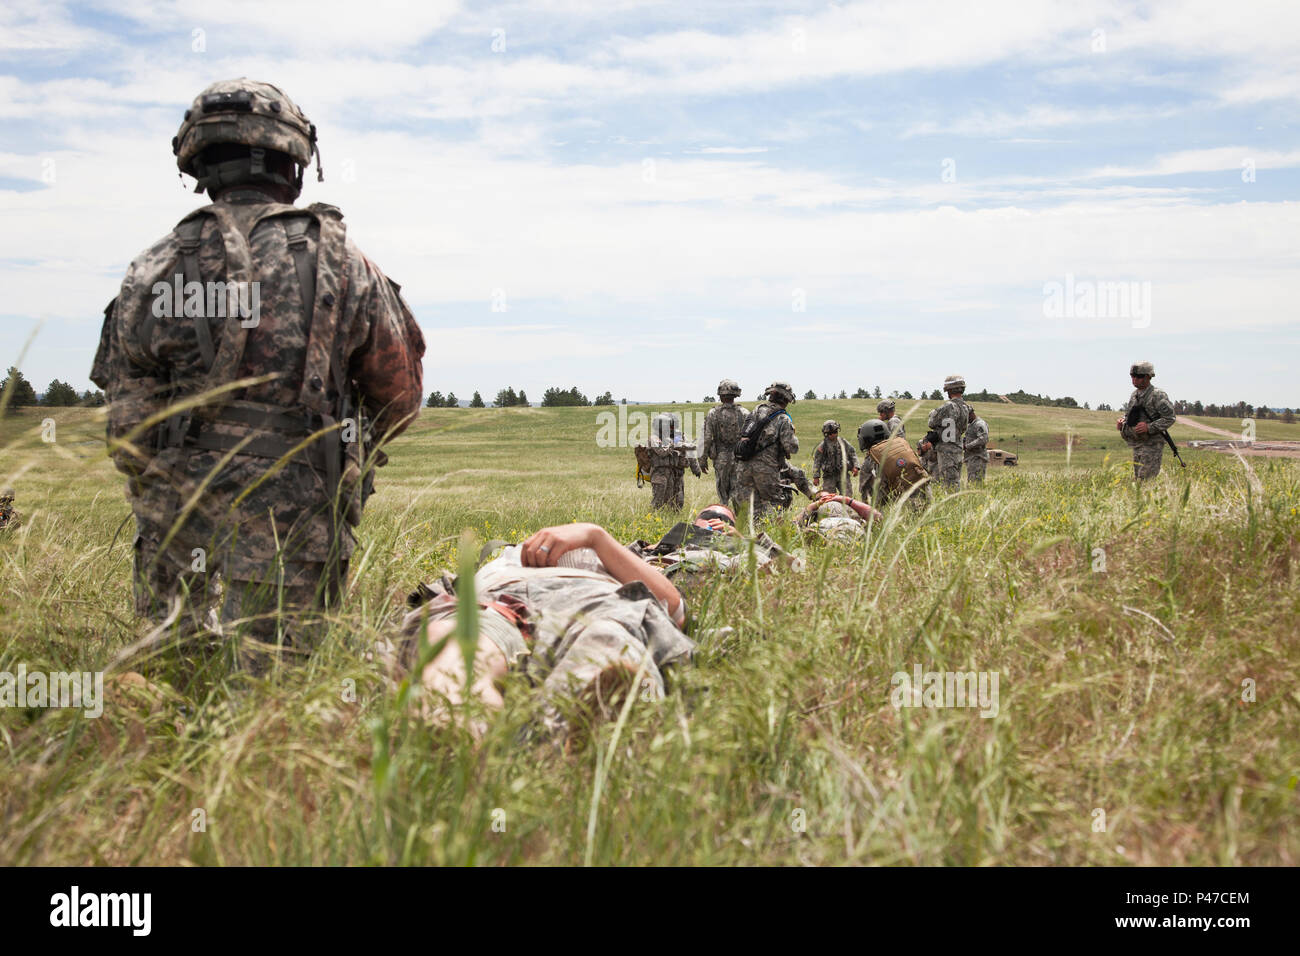 U.S. Army Soldiers of the 396th Medical Company (Ground Ambulance) extract wounded soldiers to a landing zone during a mass casualty training lane for the Golden Coyote exercise, in Camp Guernsey, Wyo., June 18, 2016.  The Golden Coyote exercise is a three-phase, scenario-driven exercise conducted in the Black Hills of South Dakota and Wyoming, which enables commanders to focus on mission essential task requirements, warrior tasks and battle drills. (U.S. Army photo by Spc. Chenyang Liu/Not Released) Stock Photo